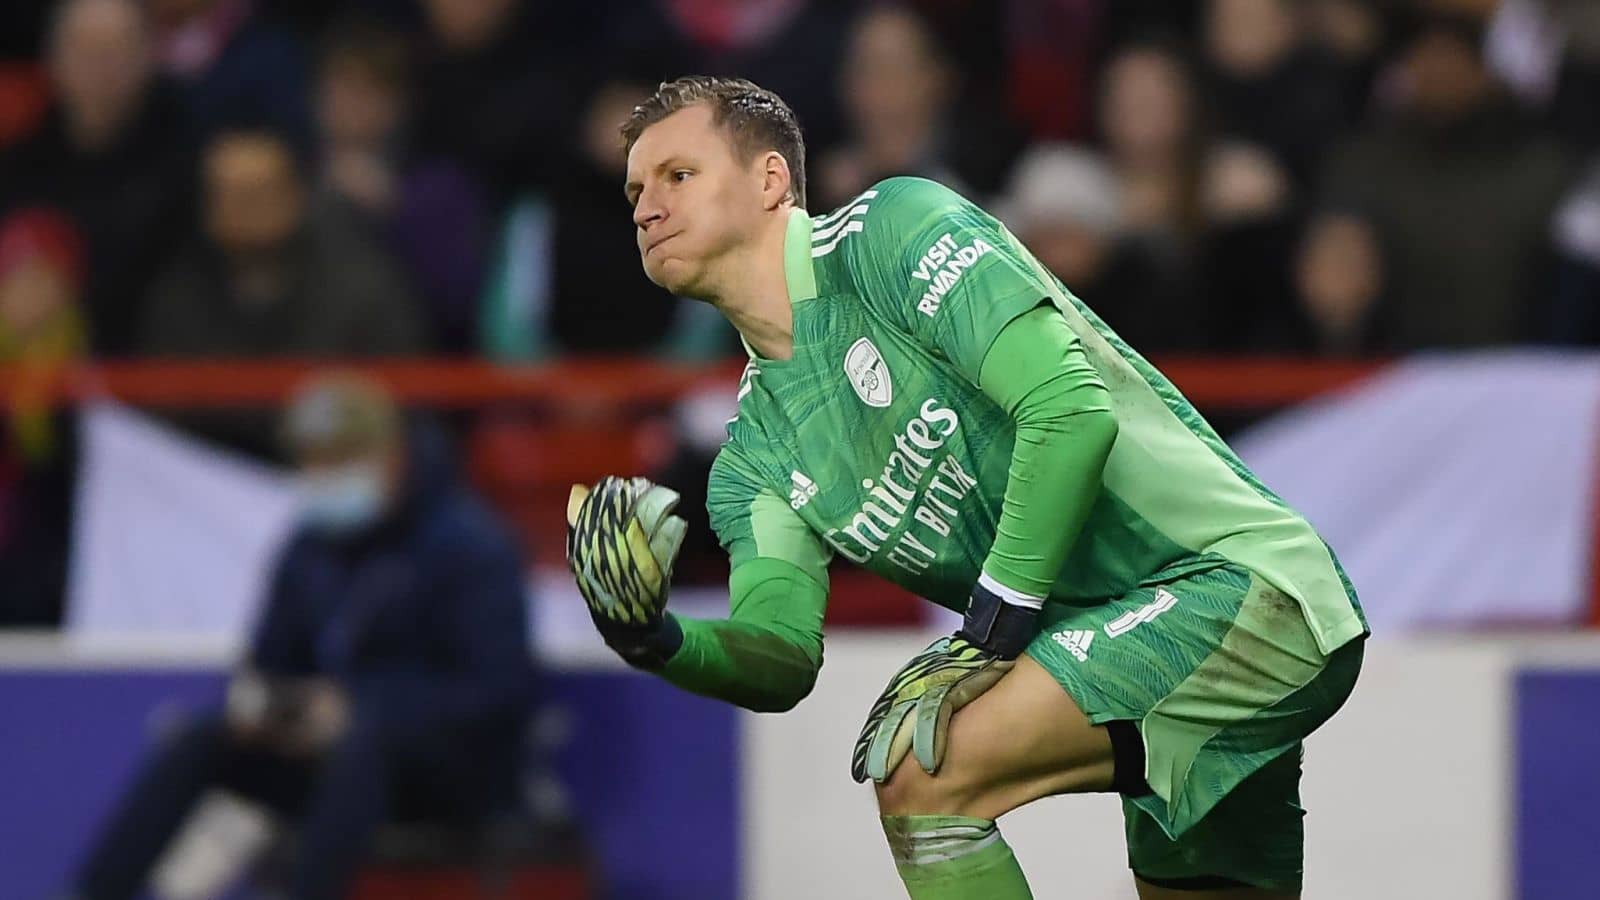 Arsenal's goalkeeper is on the verge of an £8 million move to Fulham